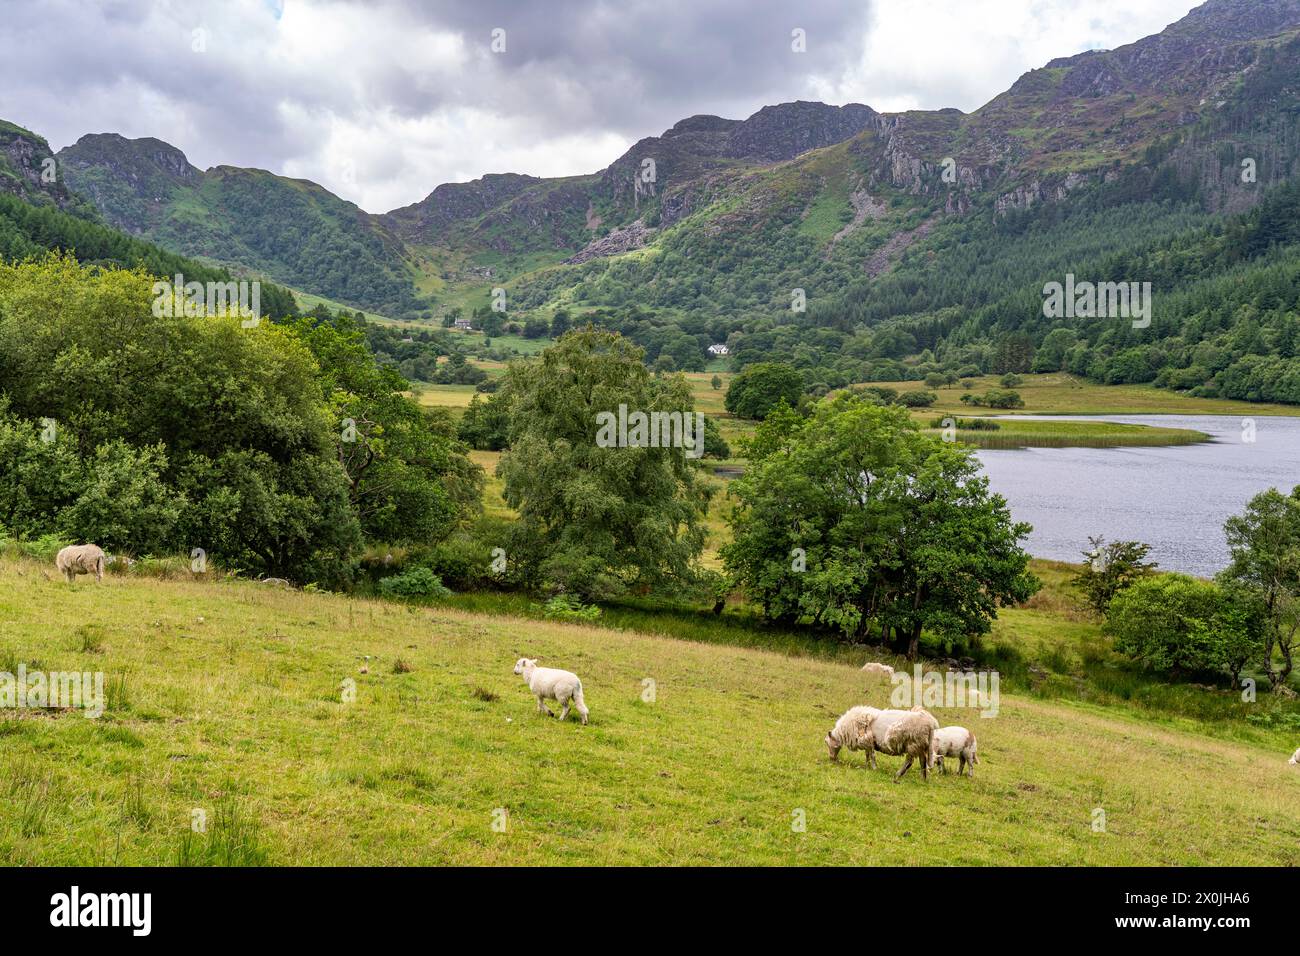 Sheep in the landscape at Lake Llyn Geirionydd, Snowdonia National Park, Wales, Great Britain, Europe Stock Photo